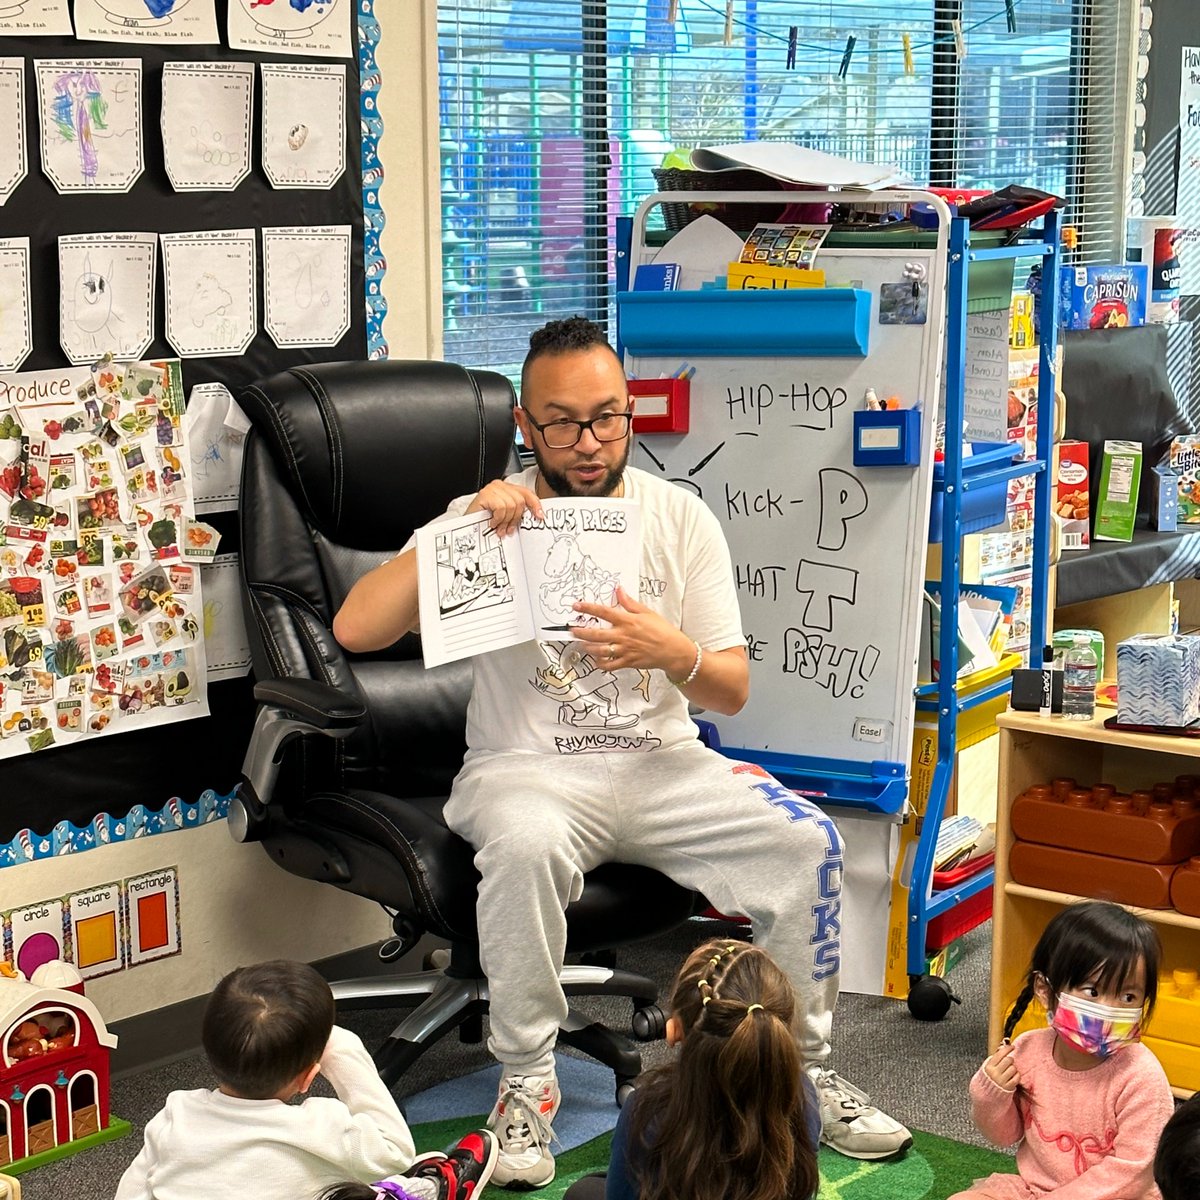 Our youngest #TCKScholars started their week by learning how to rhyme and create hip-hop songs. Orlando Molina, author of the children’s book series 'Rhymosaurs,' was here to help preschoolers rap about their favorite animals and foods.

Thank you for stopping by, Orlando!